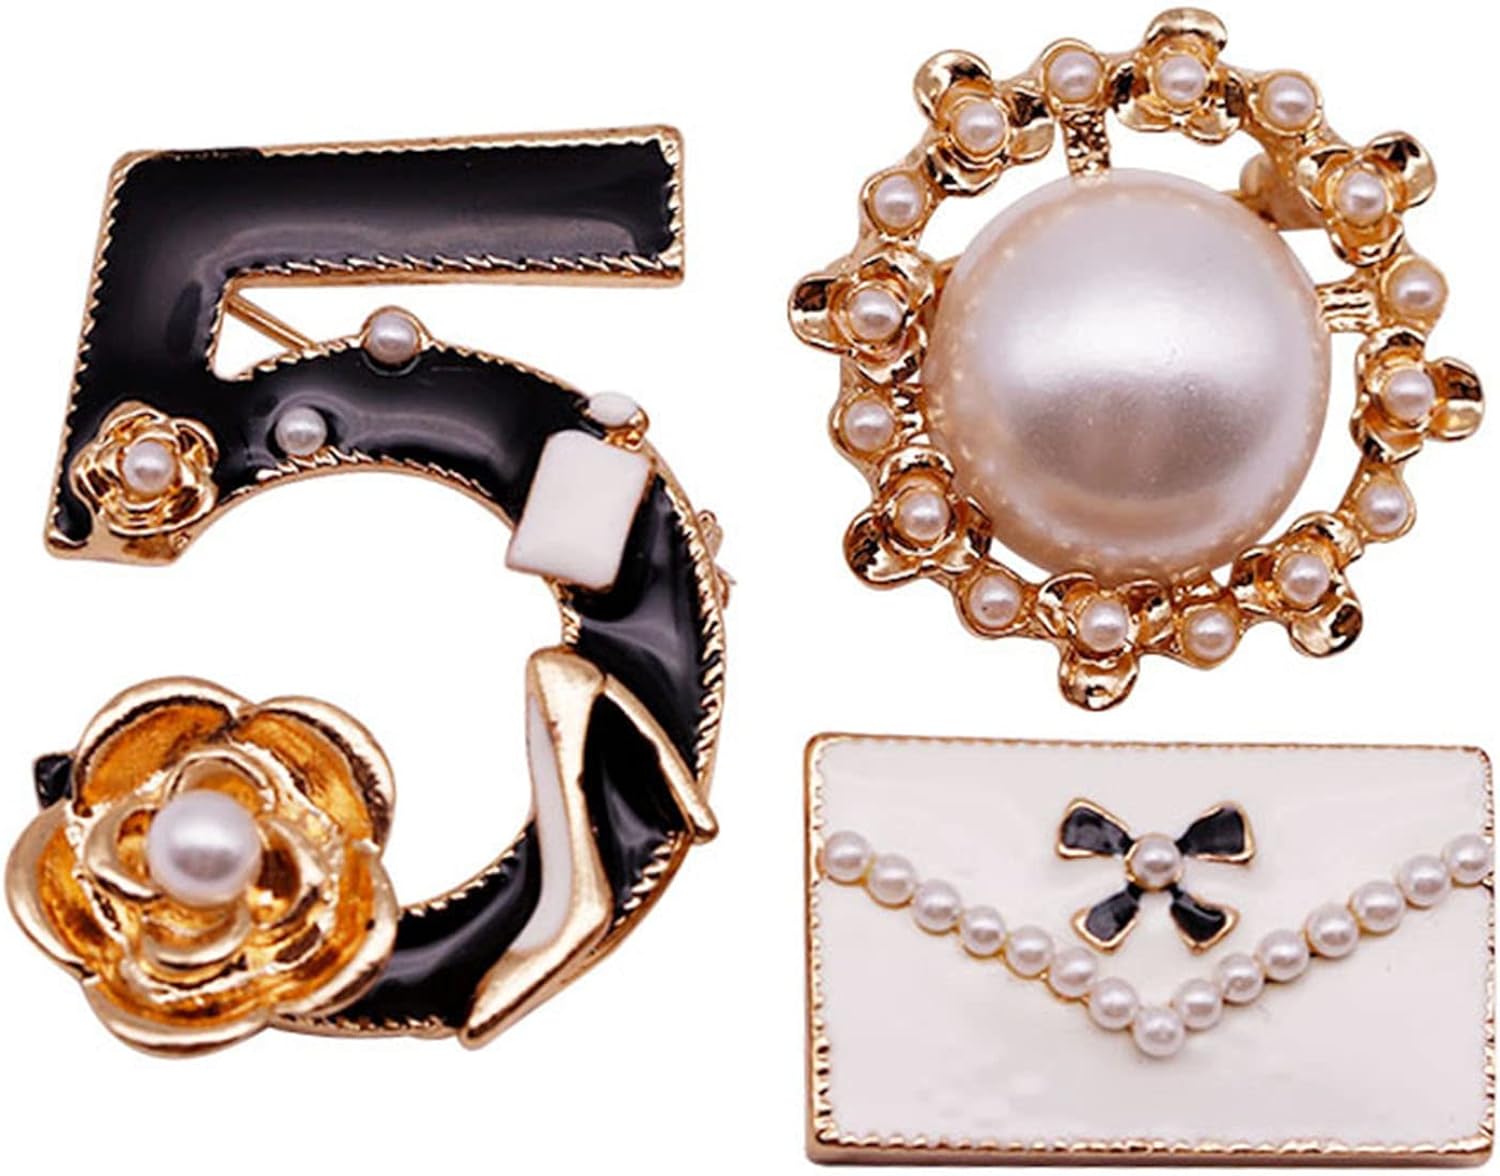 XaiYimee Vintage Imitating Pearl Brooch Number 5 Brooches Pins for Women Fashion Banquet Jewelry